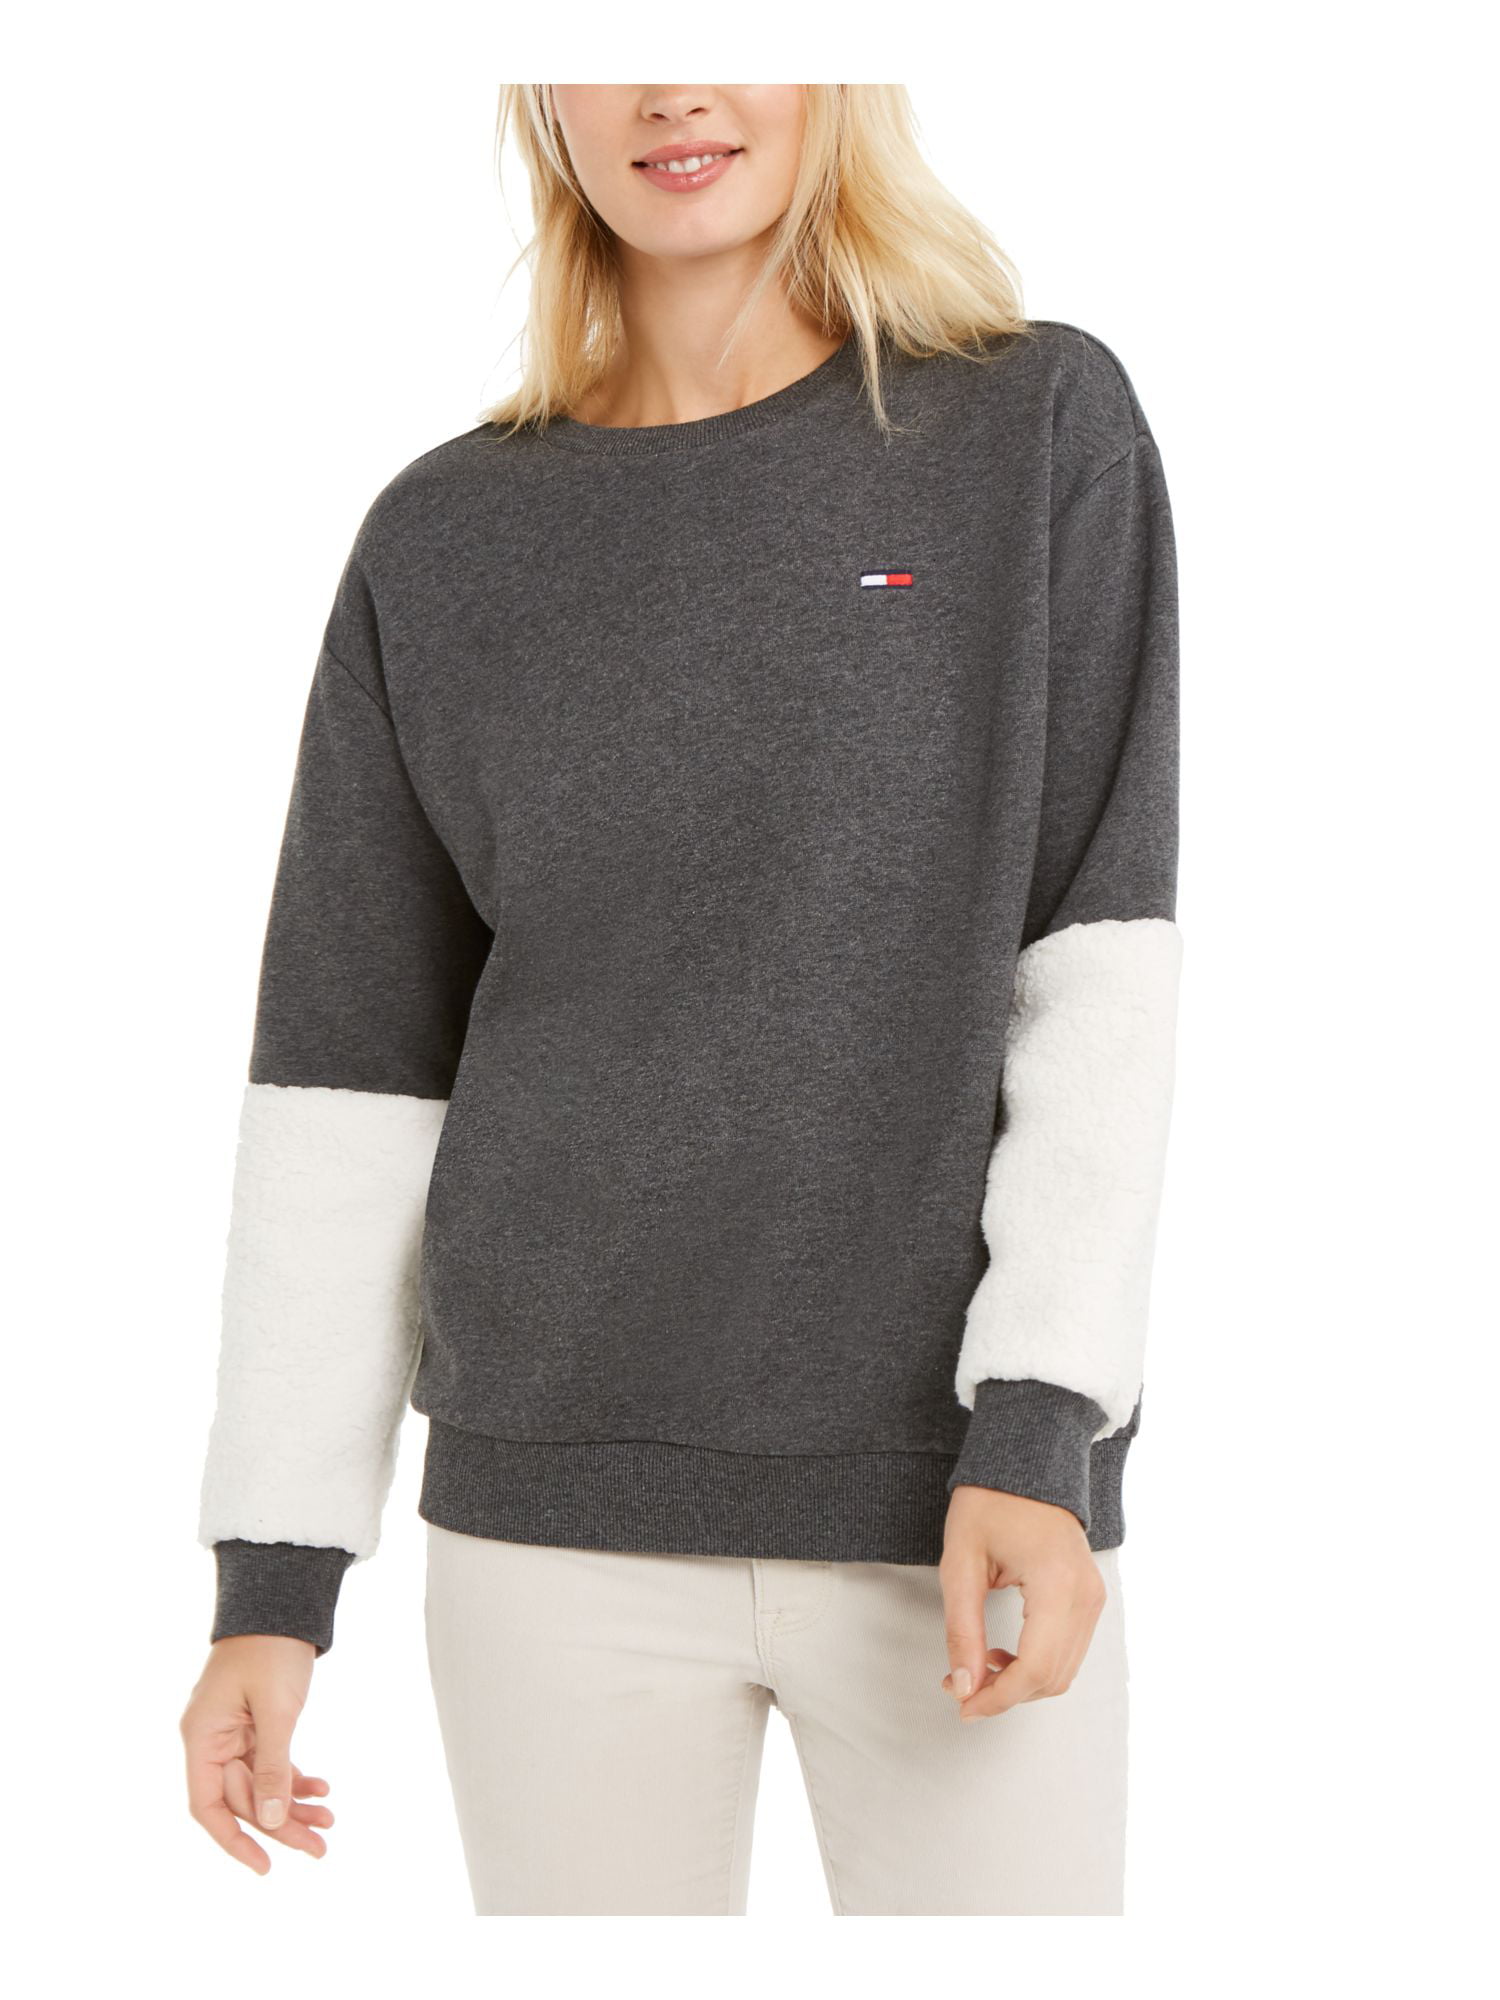 NEW WOMENS TOMMY HILFIGER CREW NECK SWEATER PULLOVER JUMPER VARIETY STYLE/COLOR 